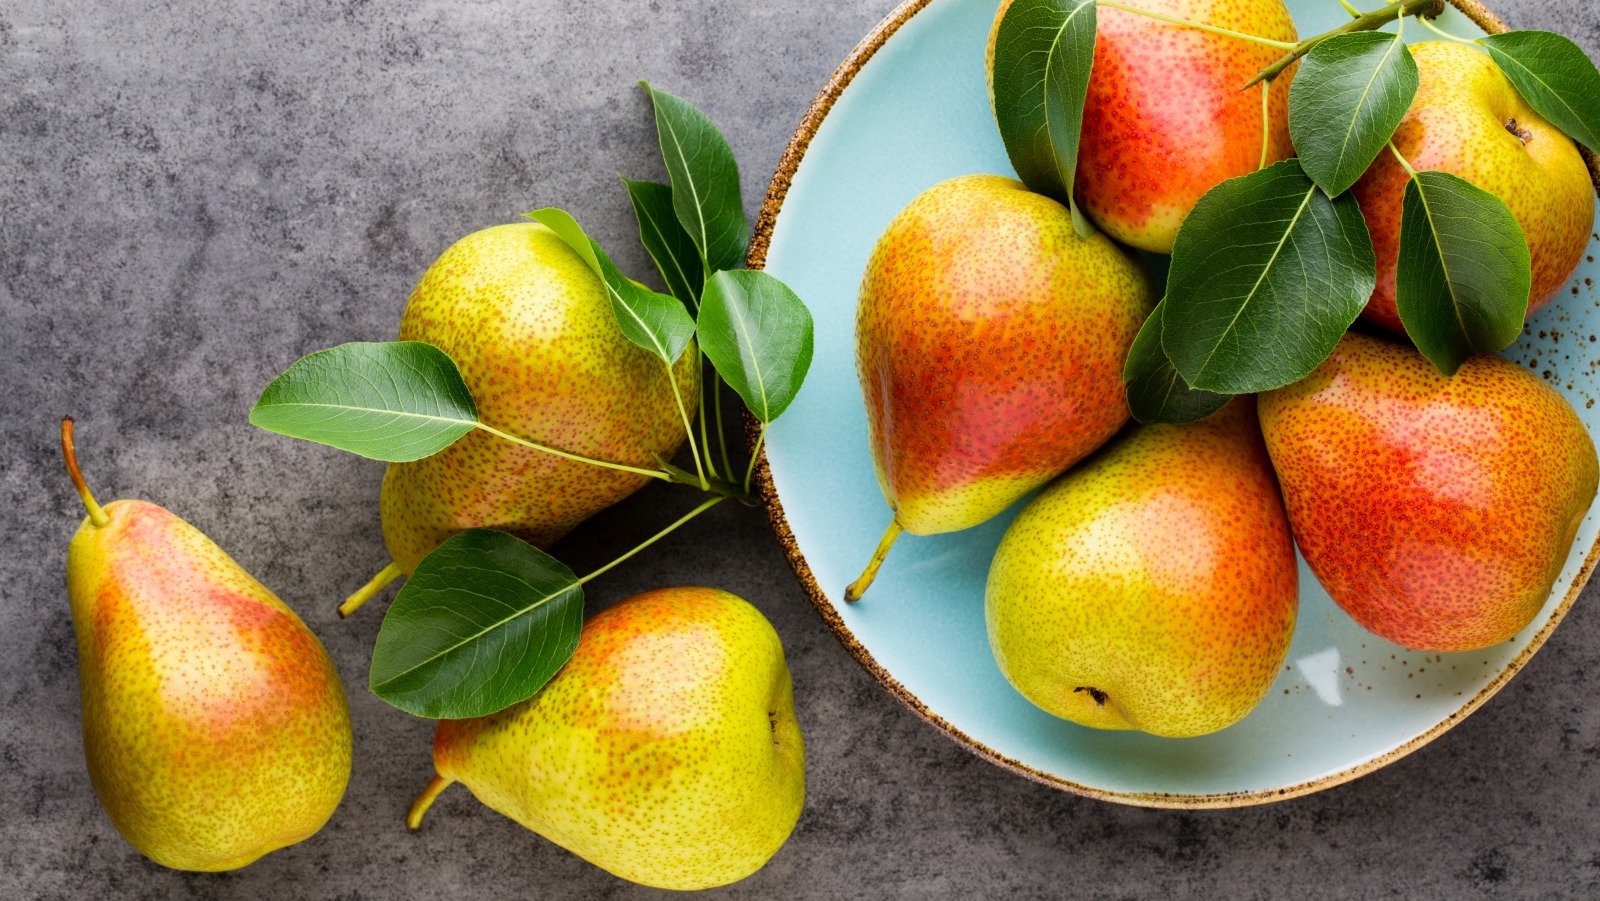 When You Eat Pears Every Day, This Is What Happens To Your Body